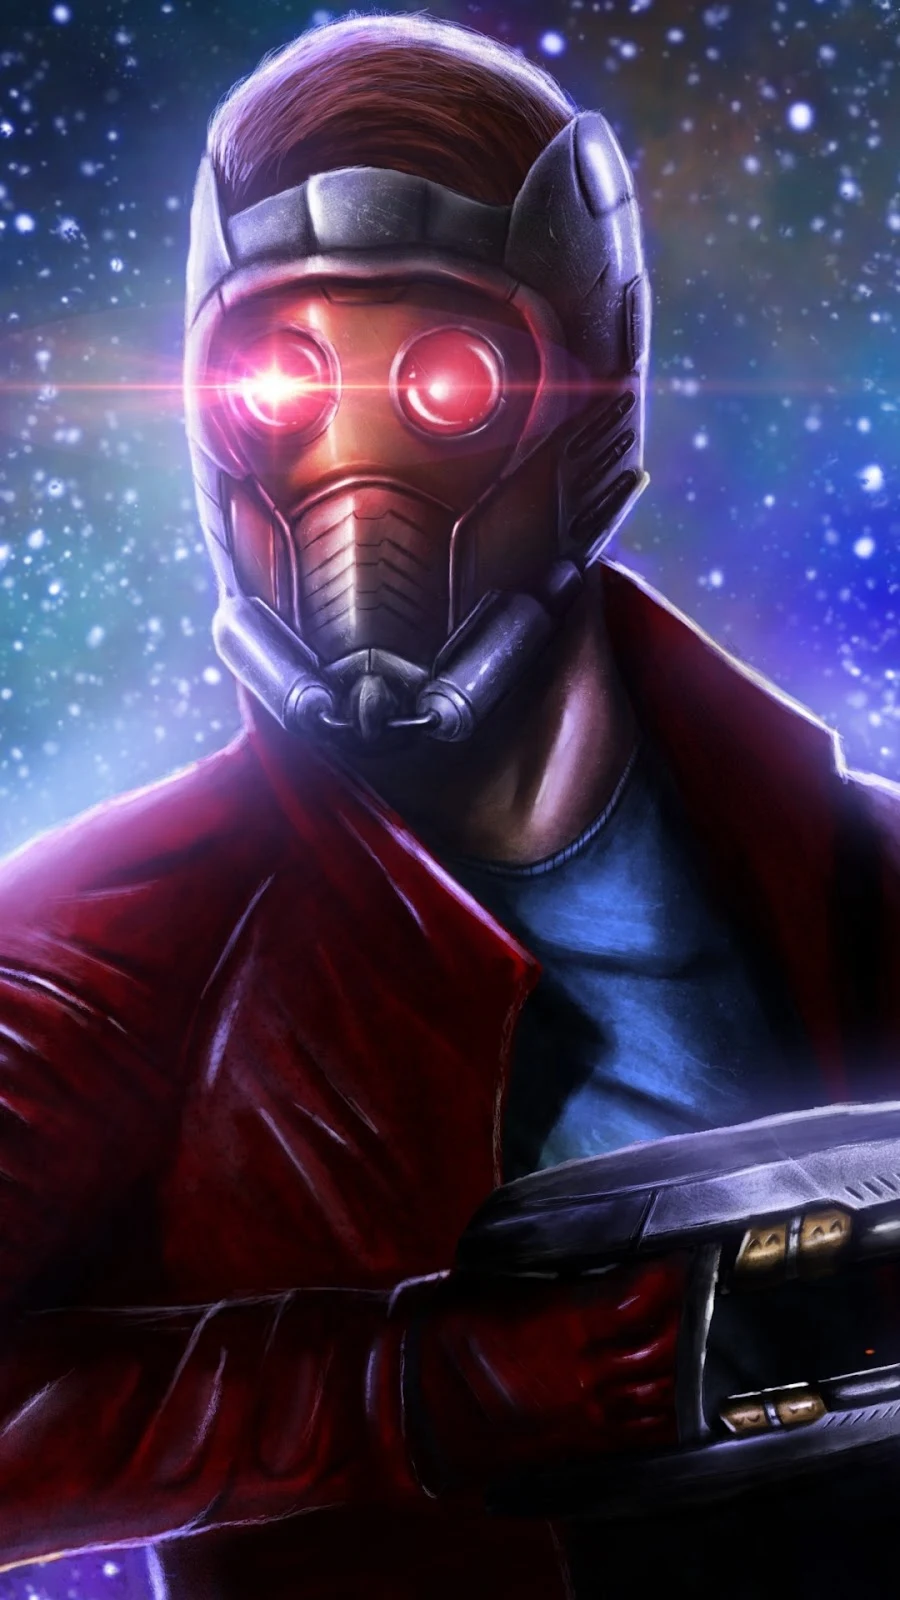 Papel de parede grátis Star-Lord Guardians of the Galaxy para PC, Notebook, iPhone, Android e Tablet.